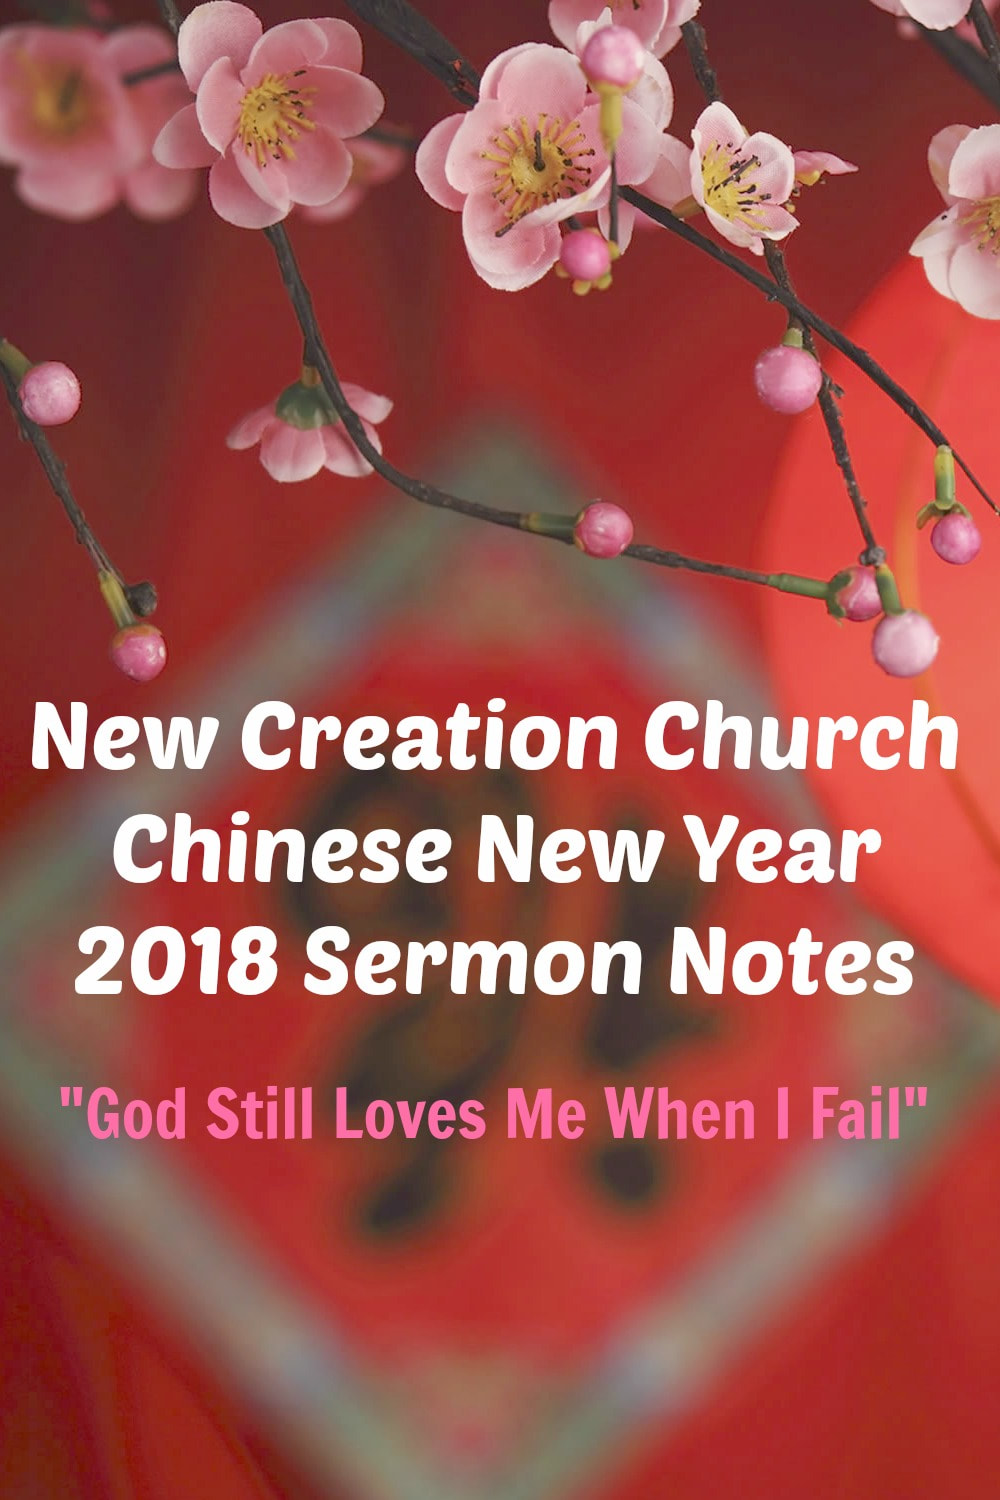 Pinterest Pinnable Image. Repin this to share with your family and friends that God still loves them in the midst of their failures and that because righteousness is a gift, they can still receive God's goodness in their lives. Happy Chinese New Year! Image Credits: www.dastornews.com